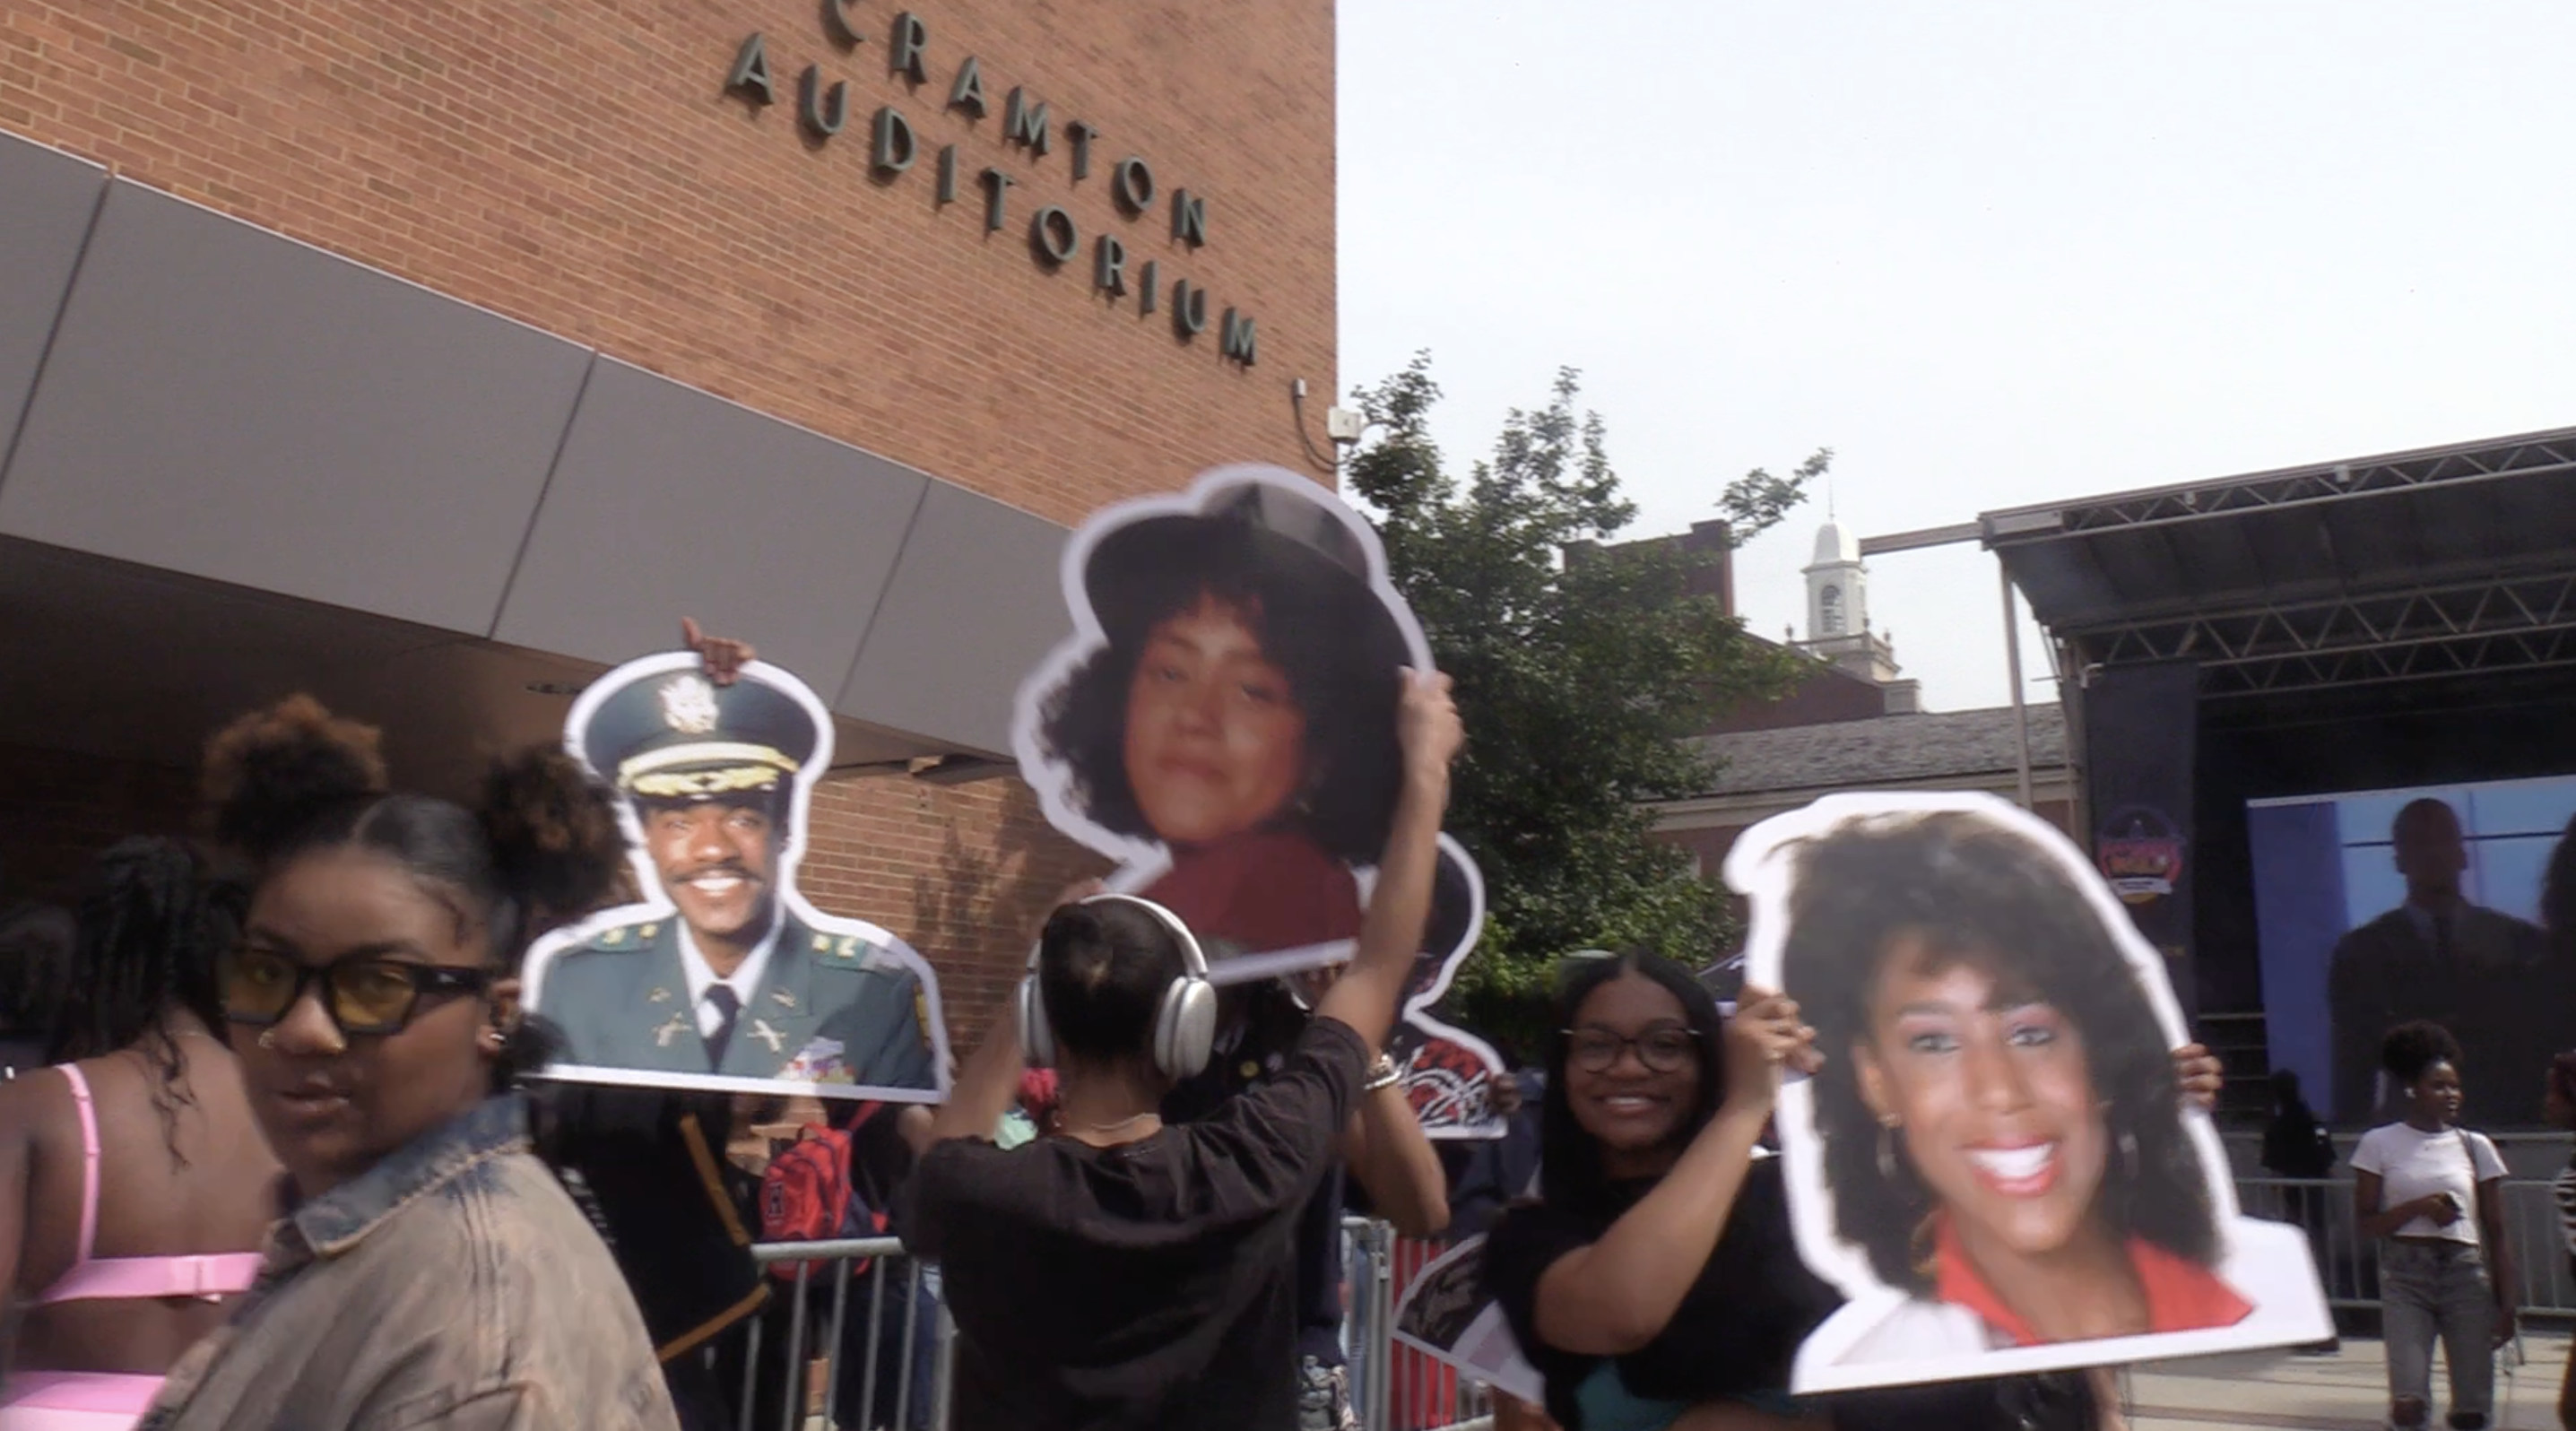 Hillman Day at HU: Cast from “A Different World” Shares Memories, Advice